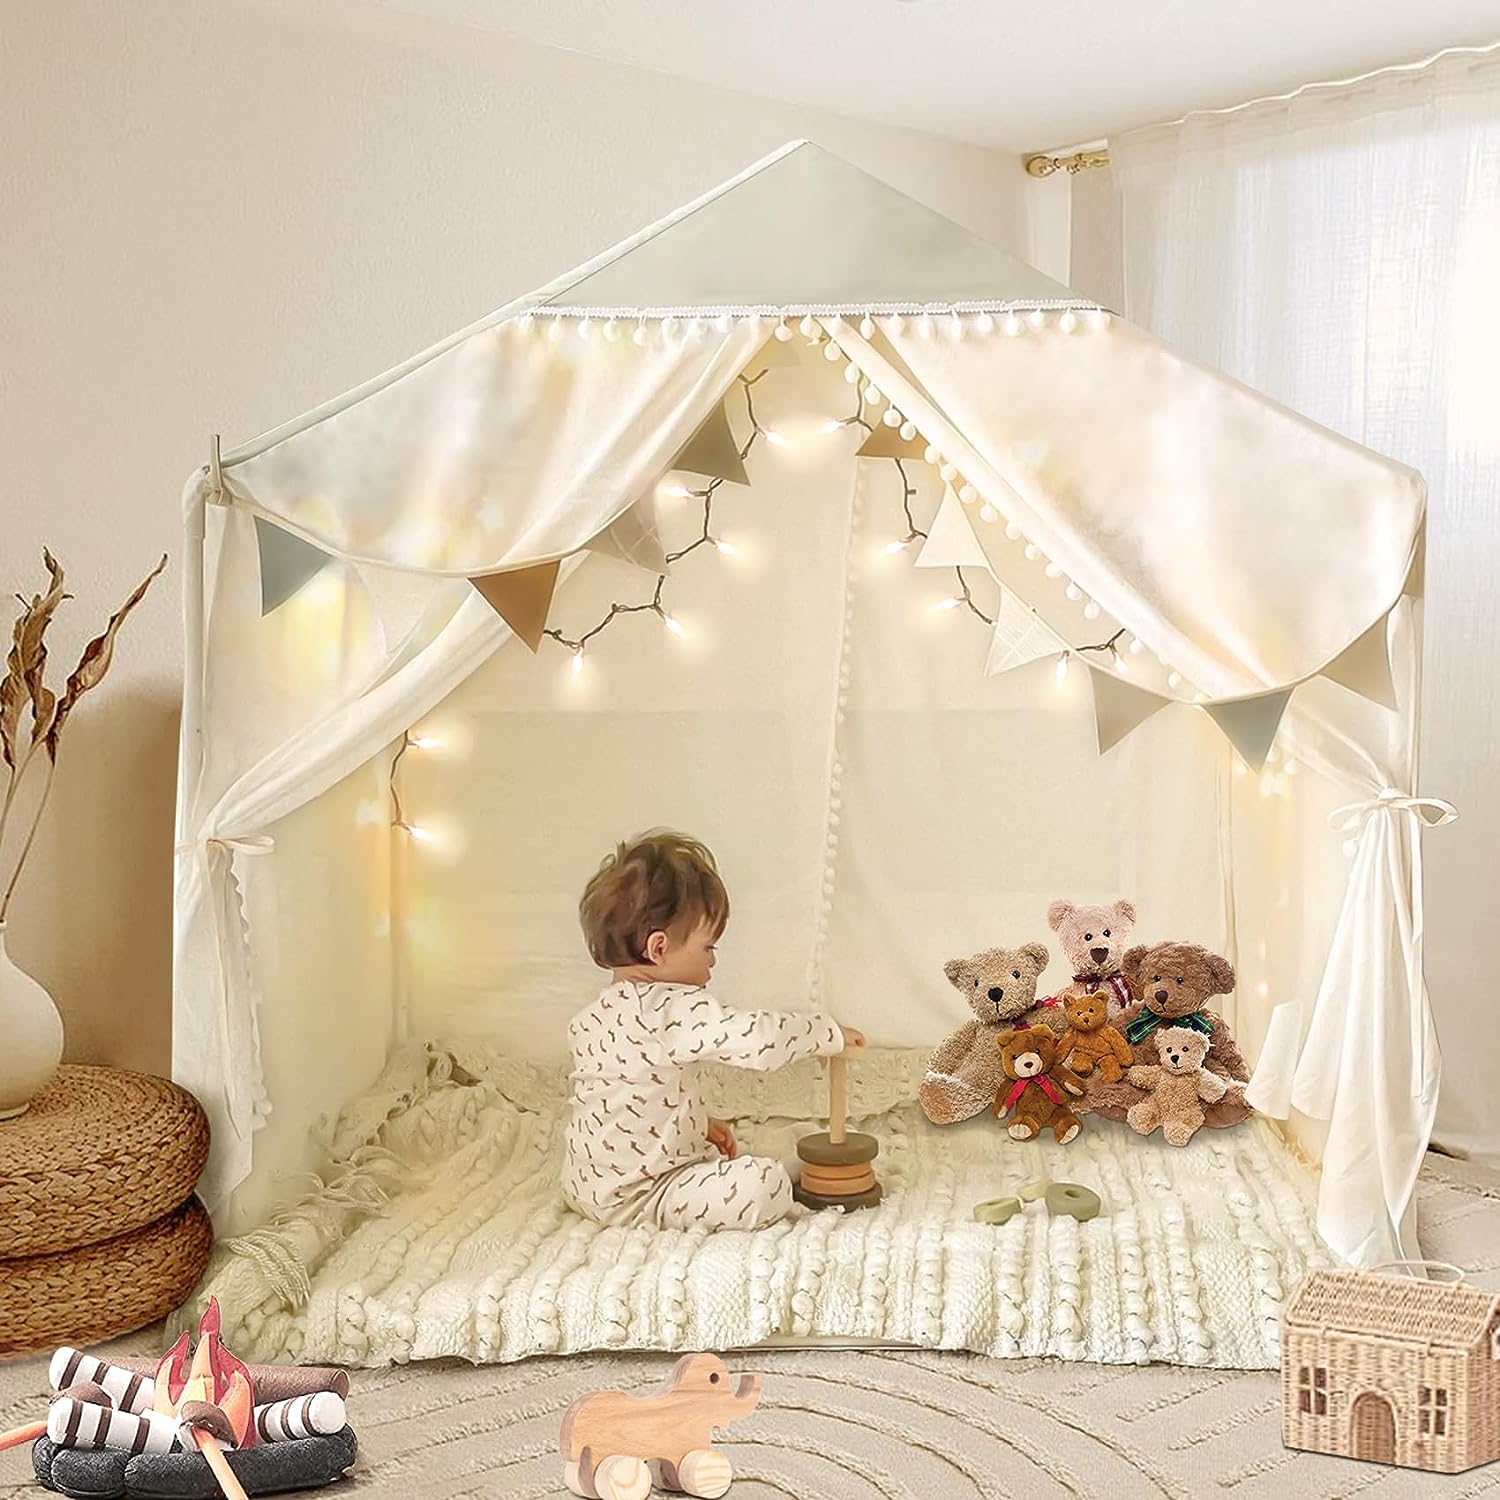 Large Kids Tent with Pompom, Kids Playhouse Indoor Outdoor with Mat and Star Lights, Play Tent for Kids Girls Boys, Toddler Tent Boho Tent Machine Washable